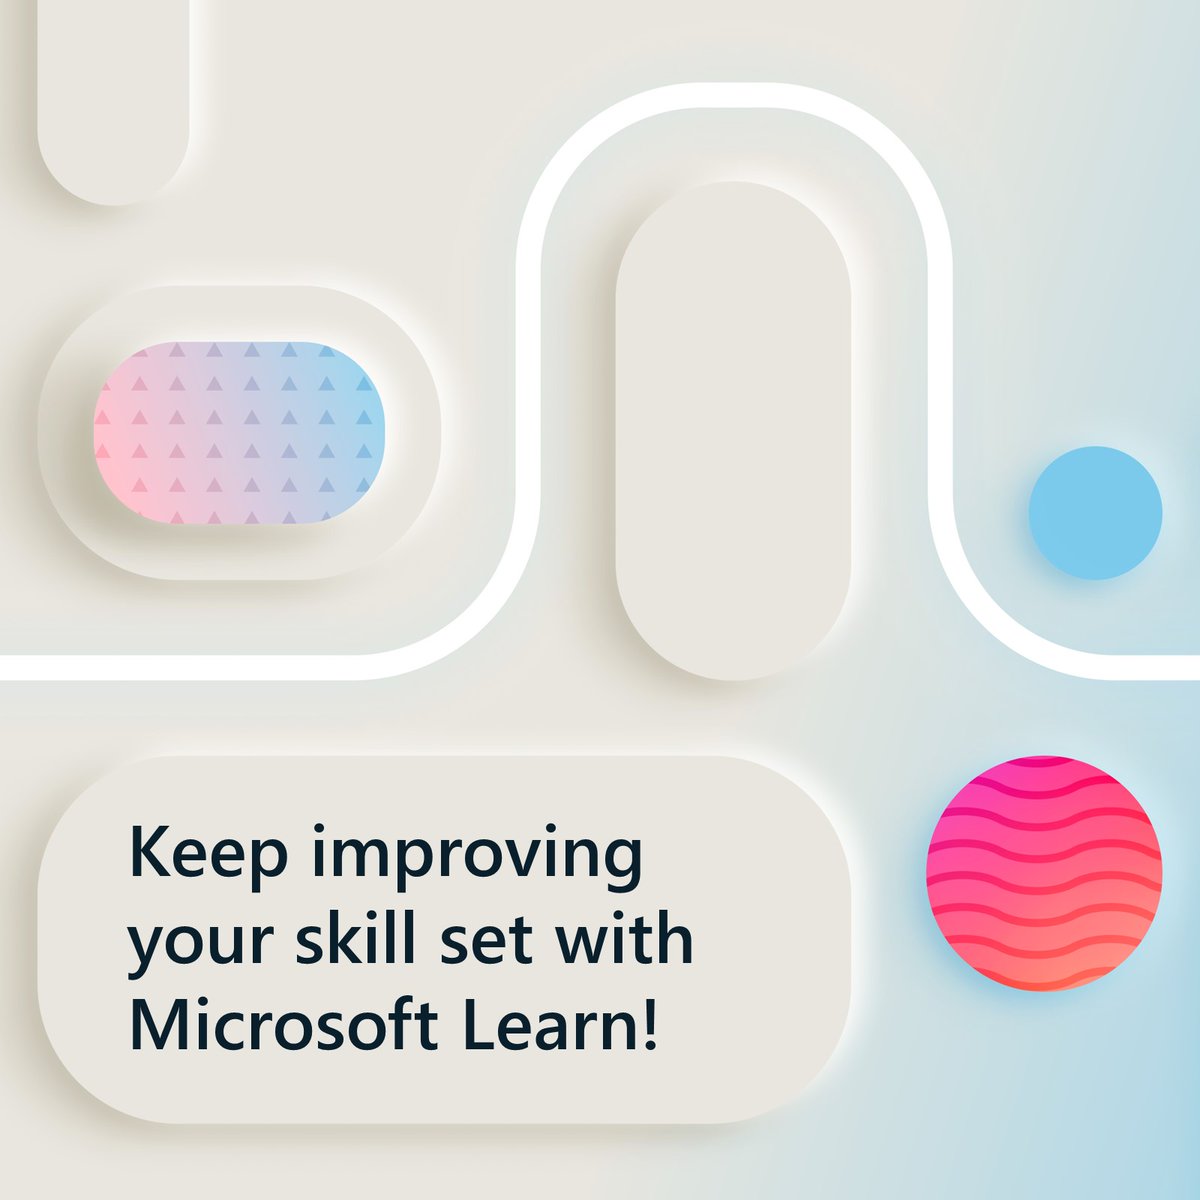 Hey, did you know that we have curated collections for each of the #MSBuild topics? No, it's not too good to be true. 😏 

From #AI to cloud development, you can continue learning and improving your skills with Microsoft Learn: aka.ms/BuildCollectio…